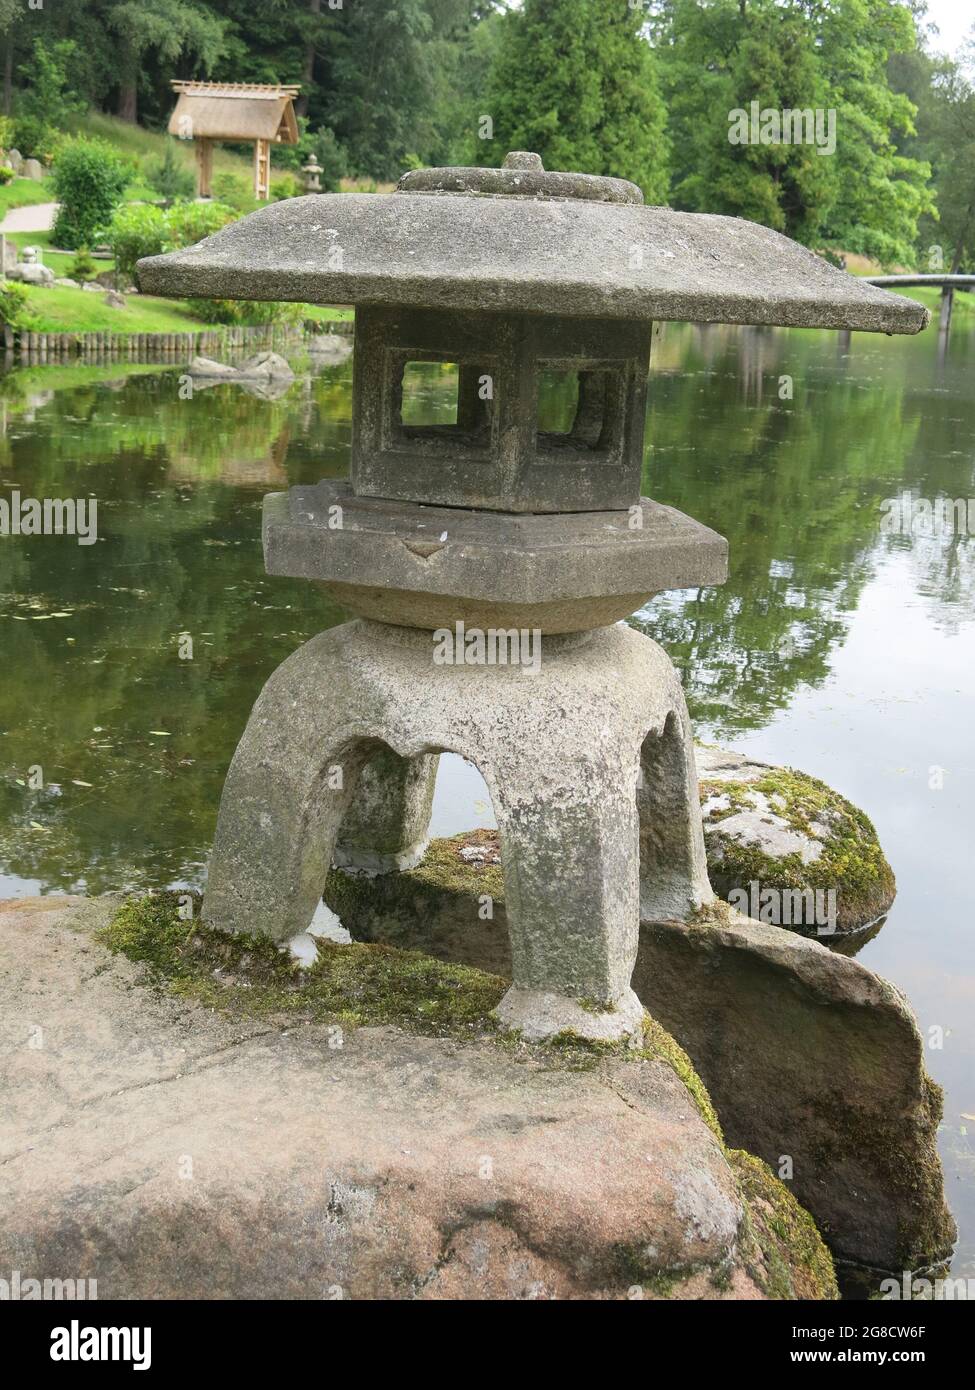 Stone lanterns are just one of the oriental features in the Japanese garden at Cowden, established by Ella Christie after her travels in early 1900s. Stock Photo